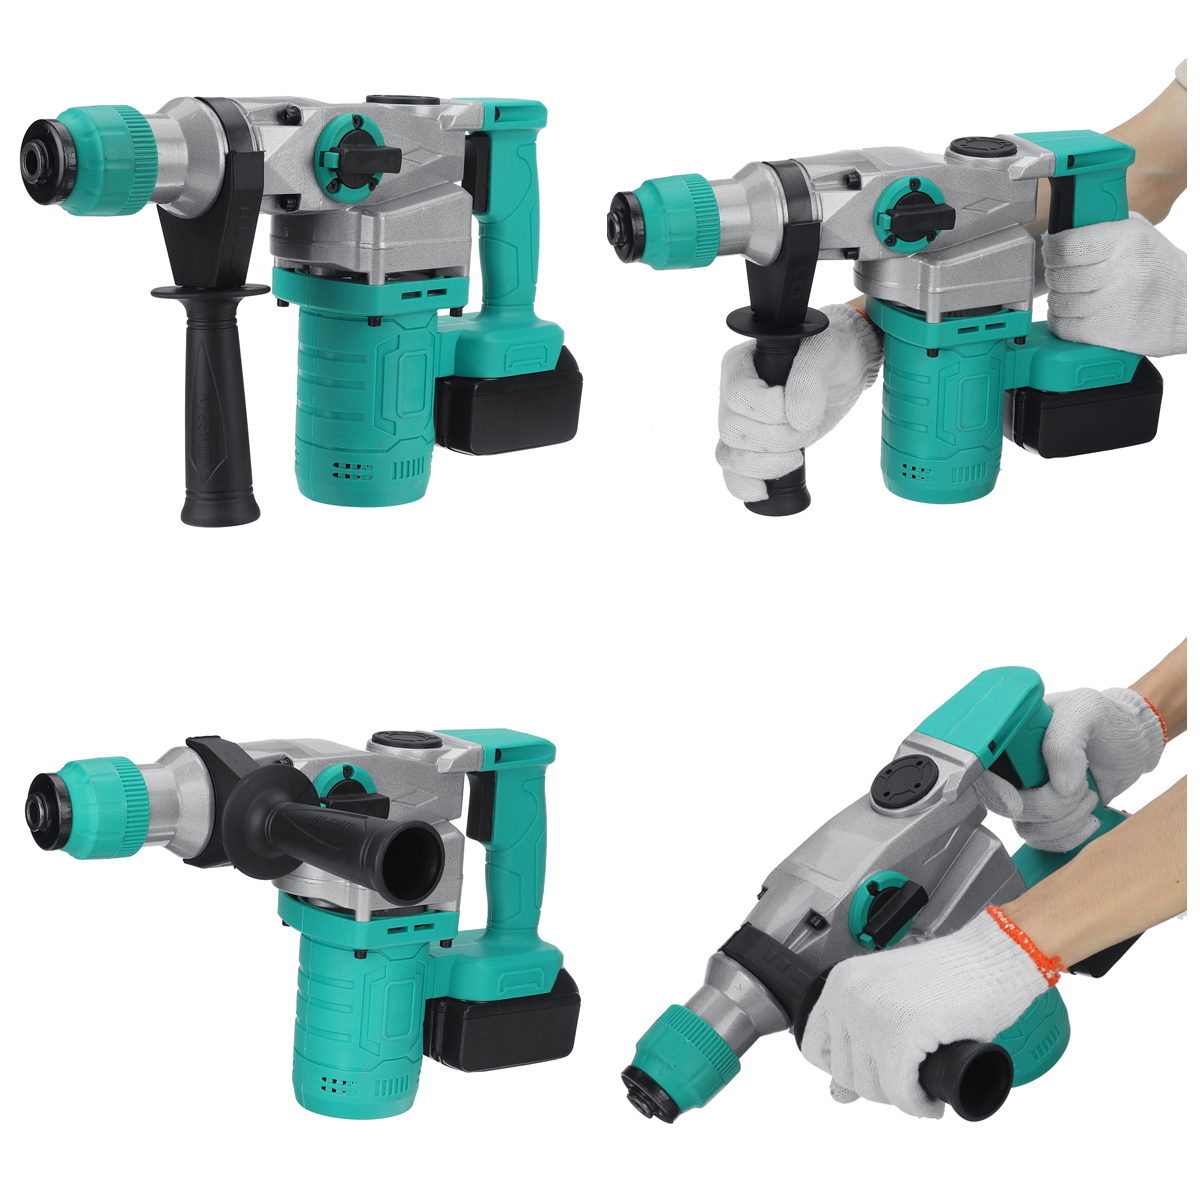 Brushless-Cordless-Electric-Hammer-Drill-Wood-Concrete-Wall-Drilling-Slotting-Tool-W-None-or-1pc-Bat-1878668-8